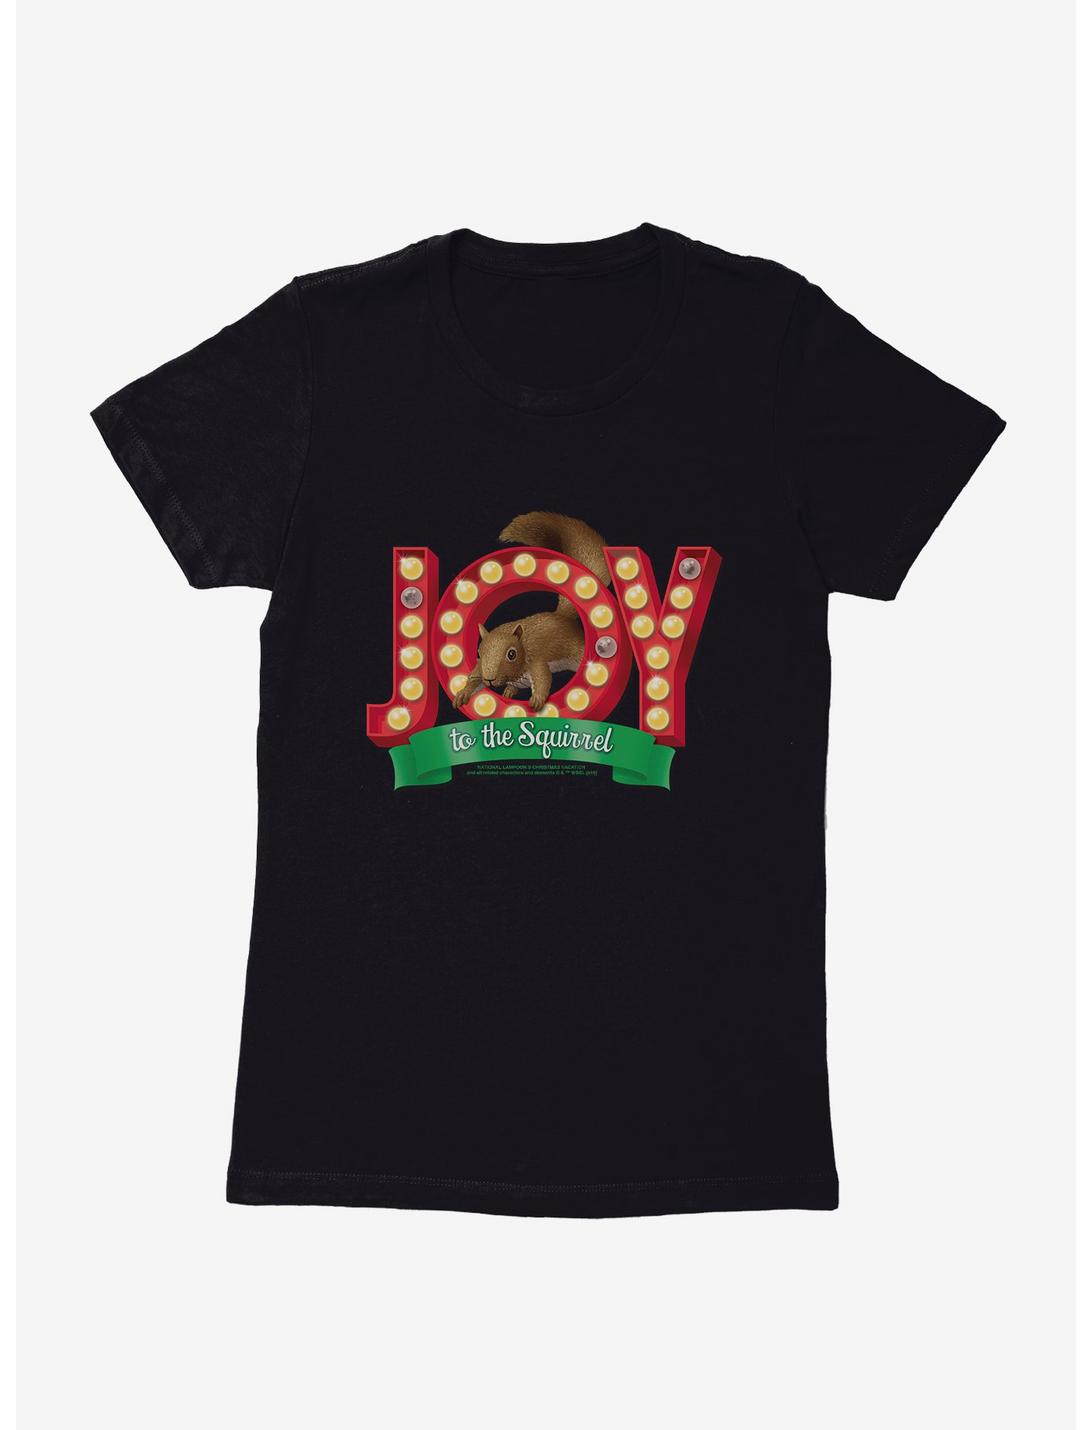 National Lampoon's Christmas Vacation Joy To The Squirrel Womens T-Shirt, BLACK, hi-res